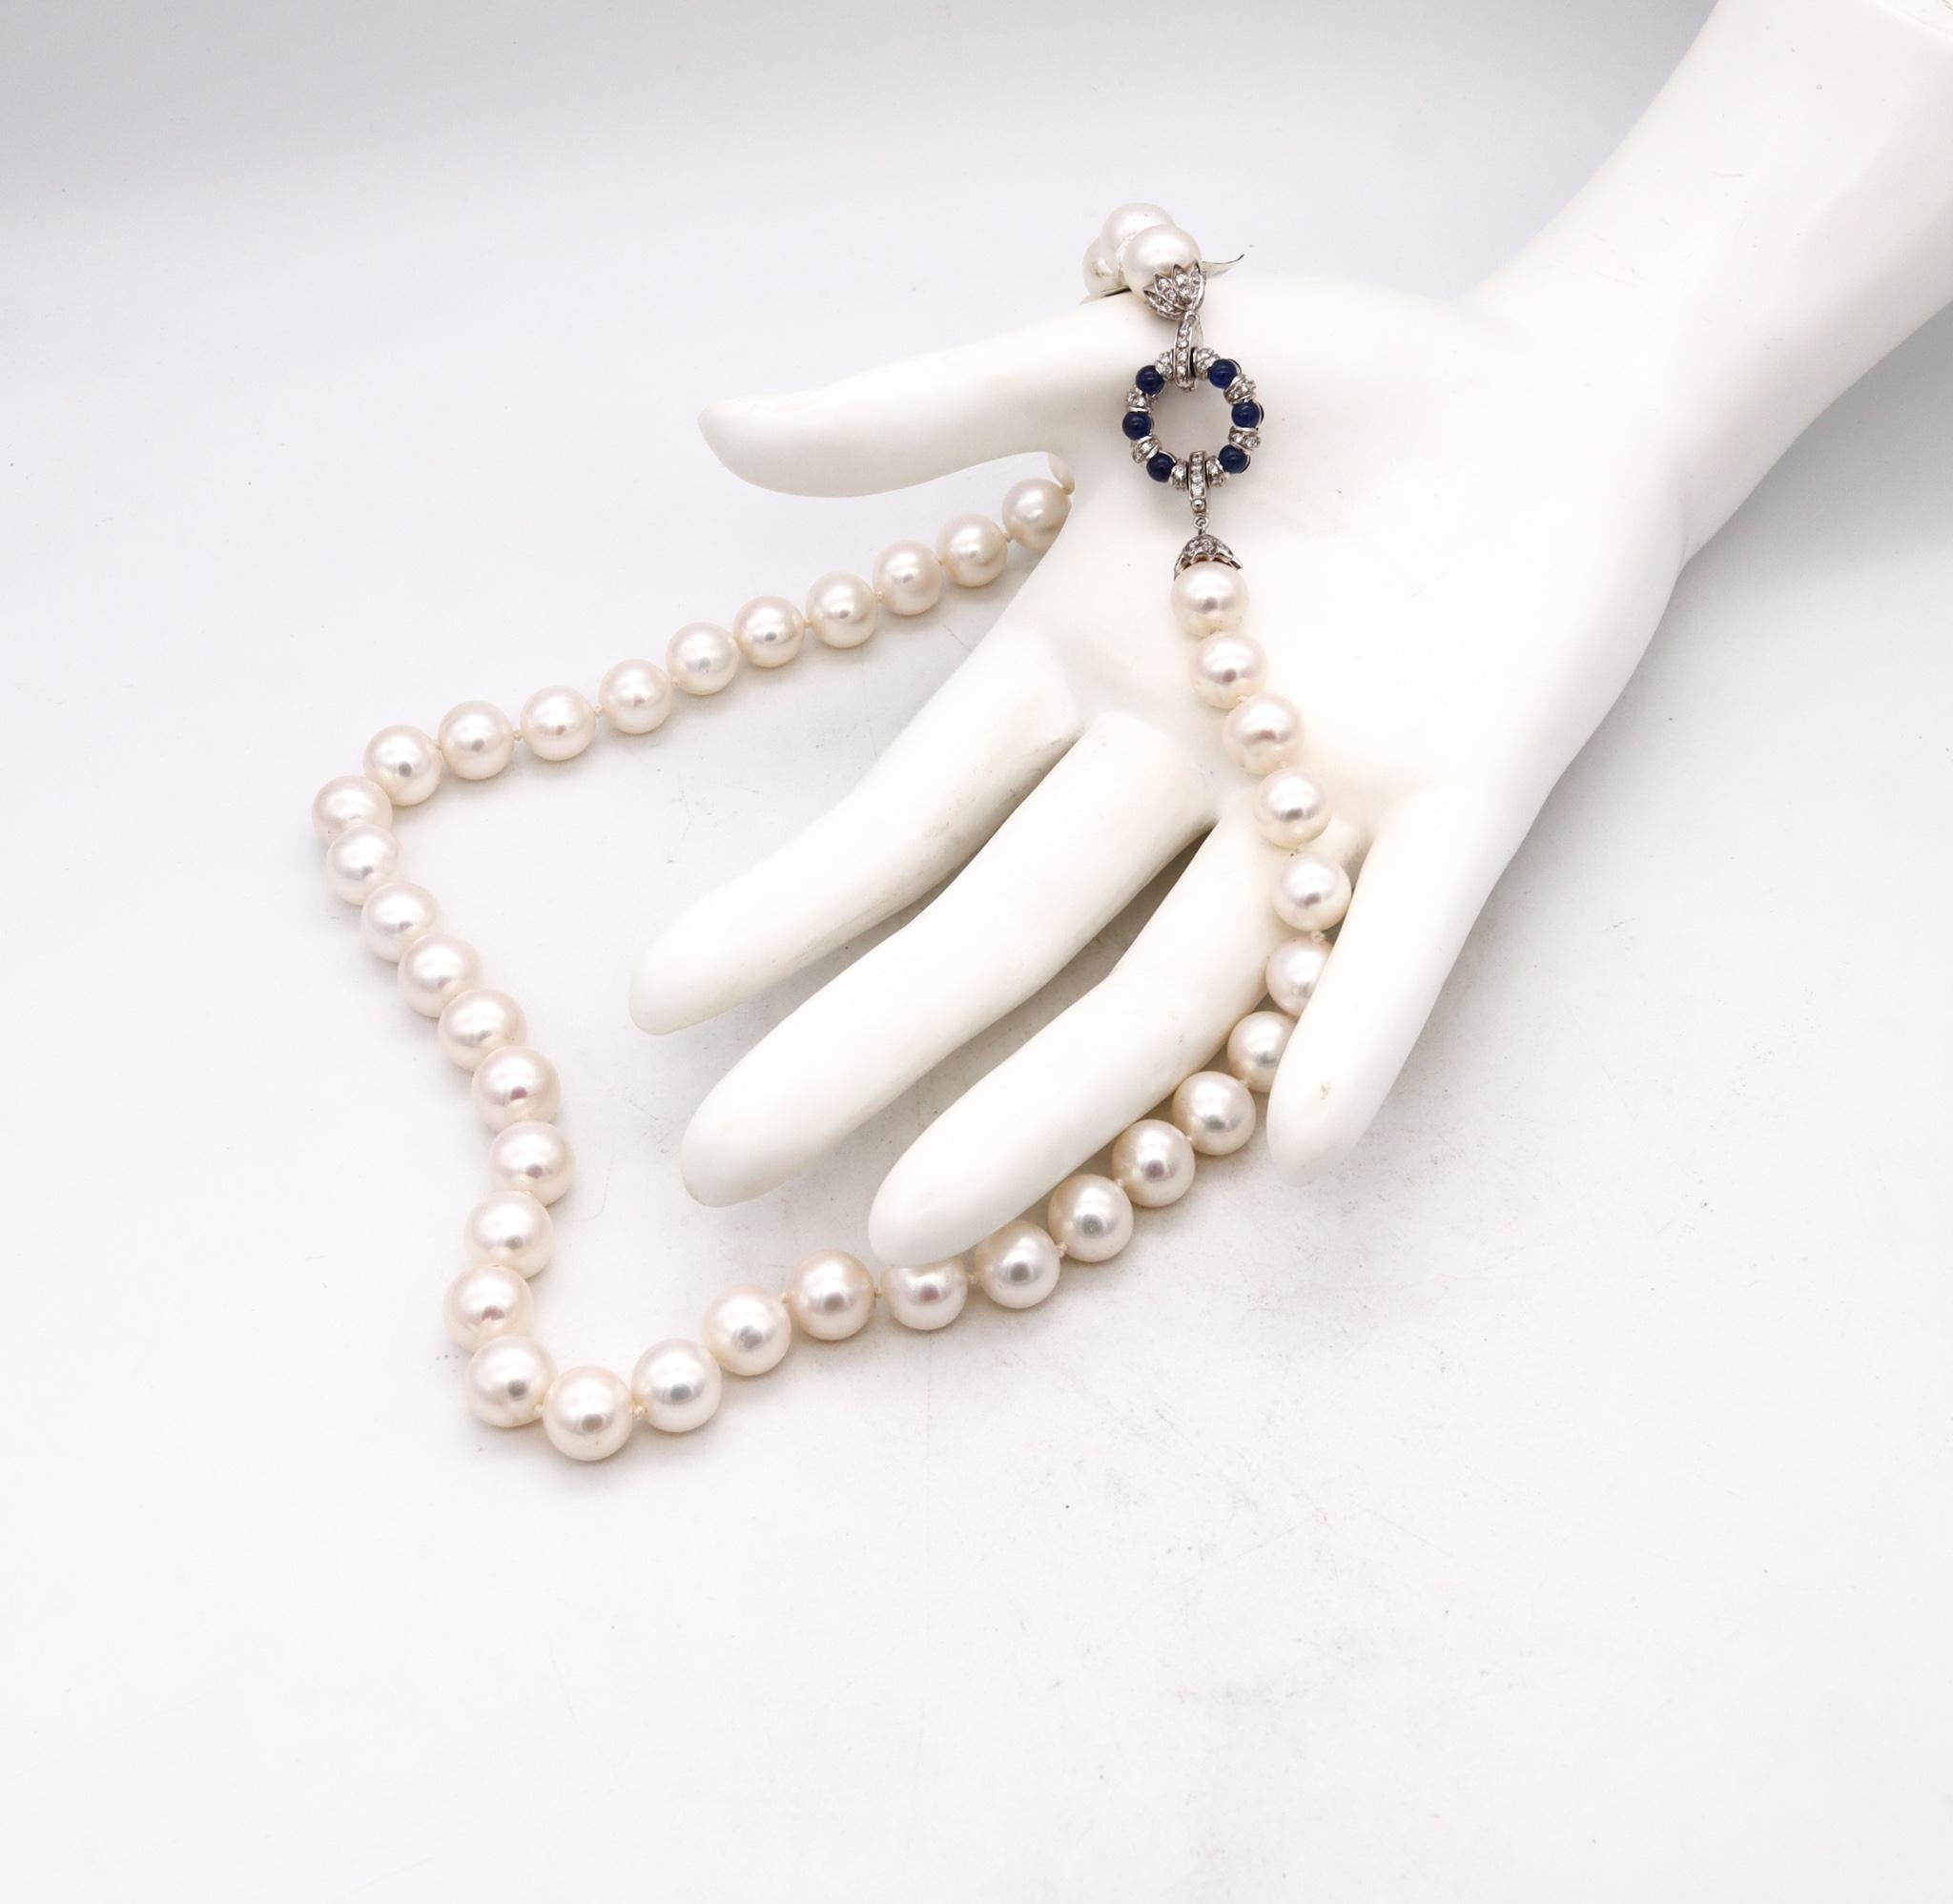 yygem 2 rows white pearl rosary chain